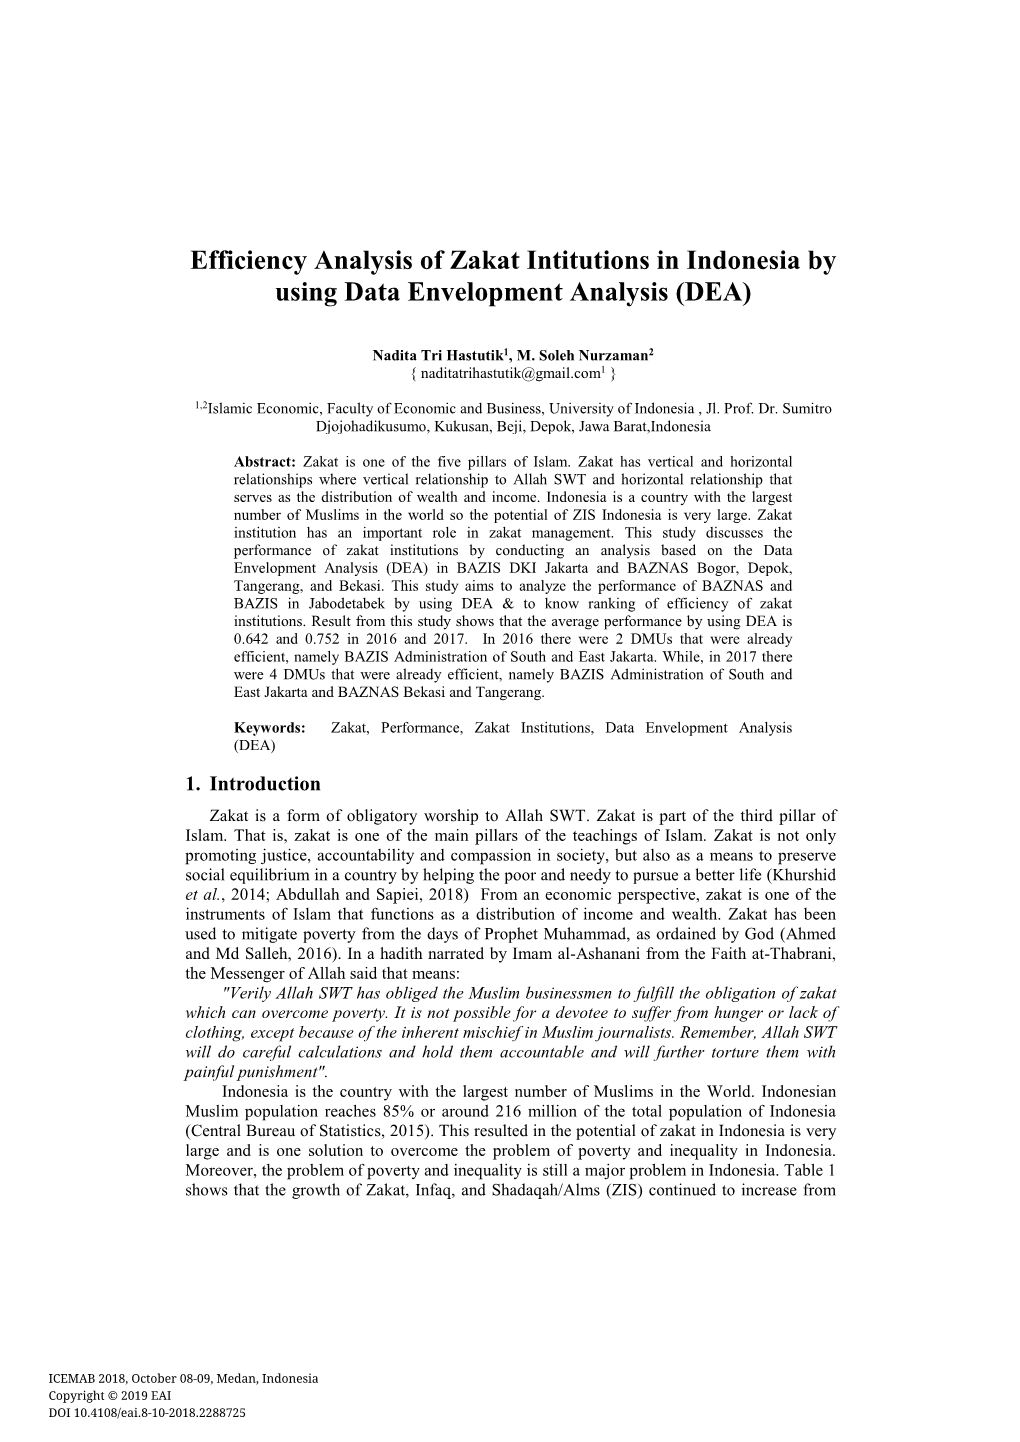 Efficiency Analysis of Zakat Intitutions in Indonesia by Using Data Envelopment Analysis (DEA)